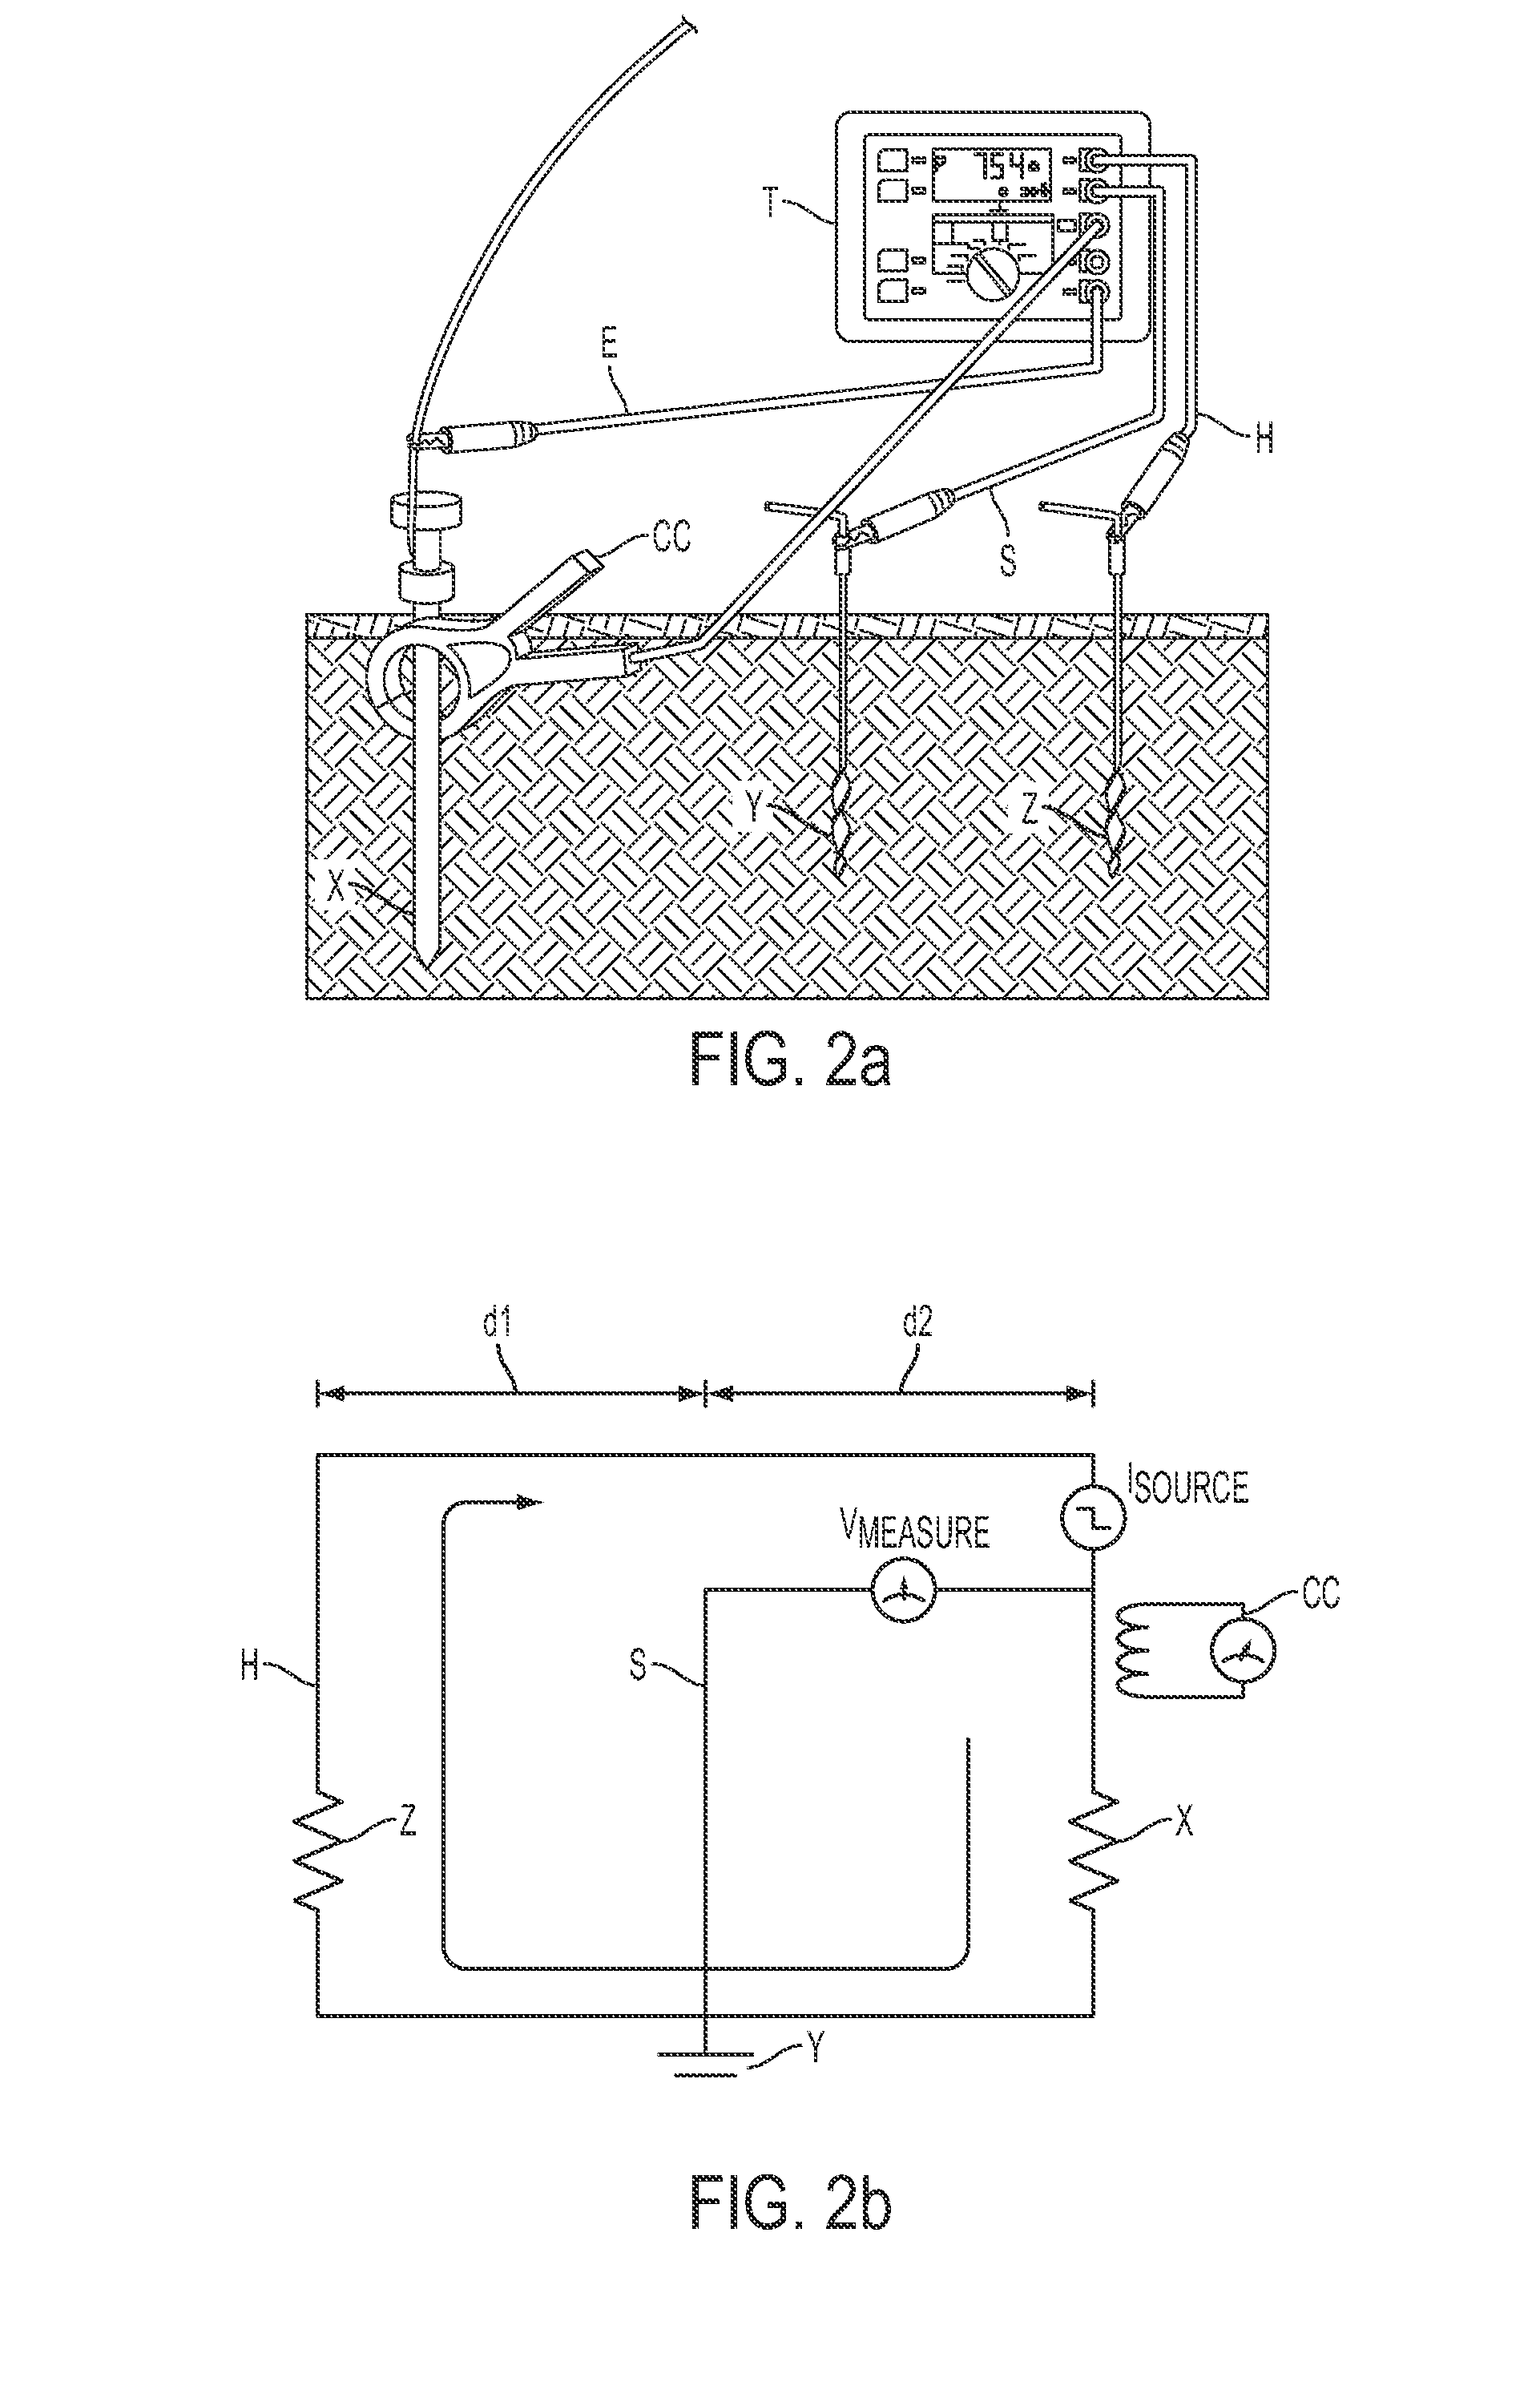 Method of Measuring Earth Ground Resistance of a Pylon